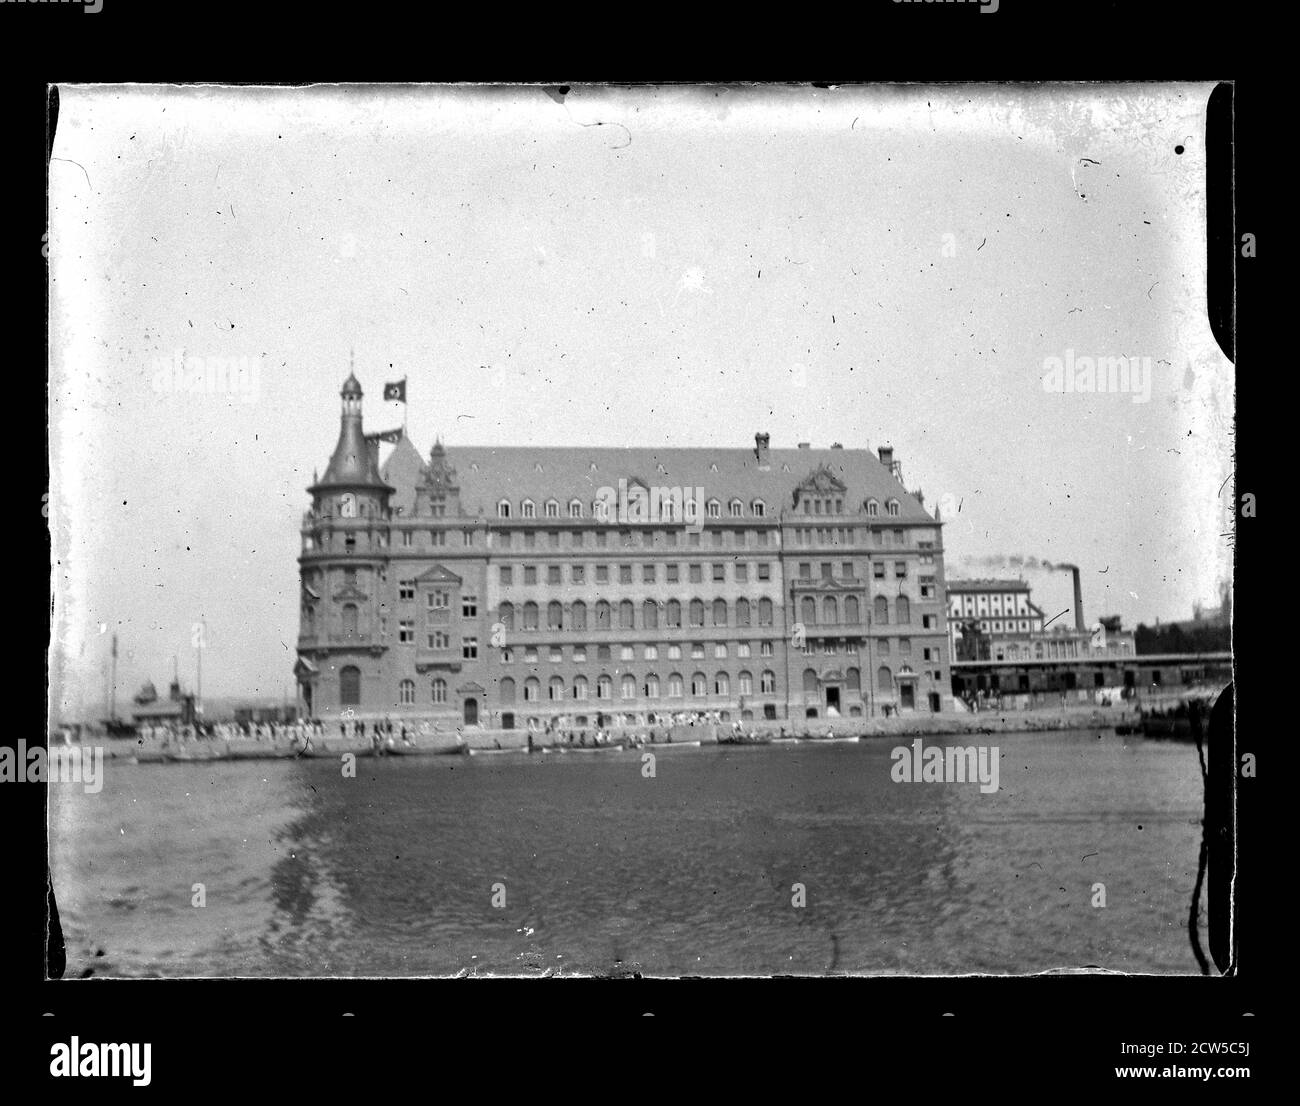 Haydarpaşa Railway Station Istanbul Turkey. Haydar pasa is Turkey's largest and most magnificent railway station which was built in the early 20th century by the German architects Otto Ritter and Helmuth Cuno. A monument to the close Turkish - German relations of the time, the station is in neo-renaissance style and has a U-plan. The inauguration ceremony took place on 19 August 1908, just after the proclamation of the Second Constitution. Photograph on dry glass plate from the Herry W. Schaefer collection, around 1910. Stock Photo